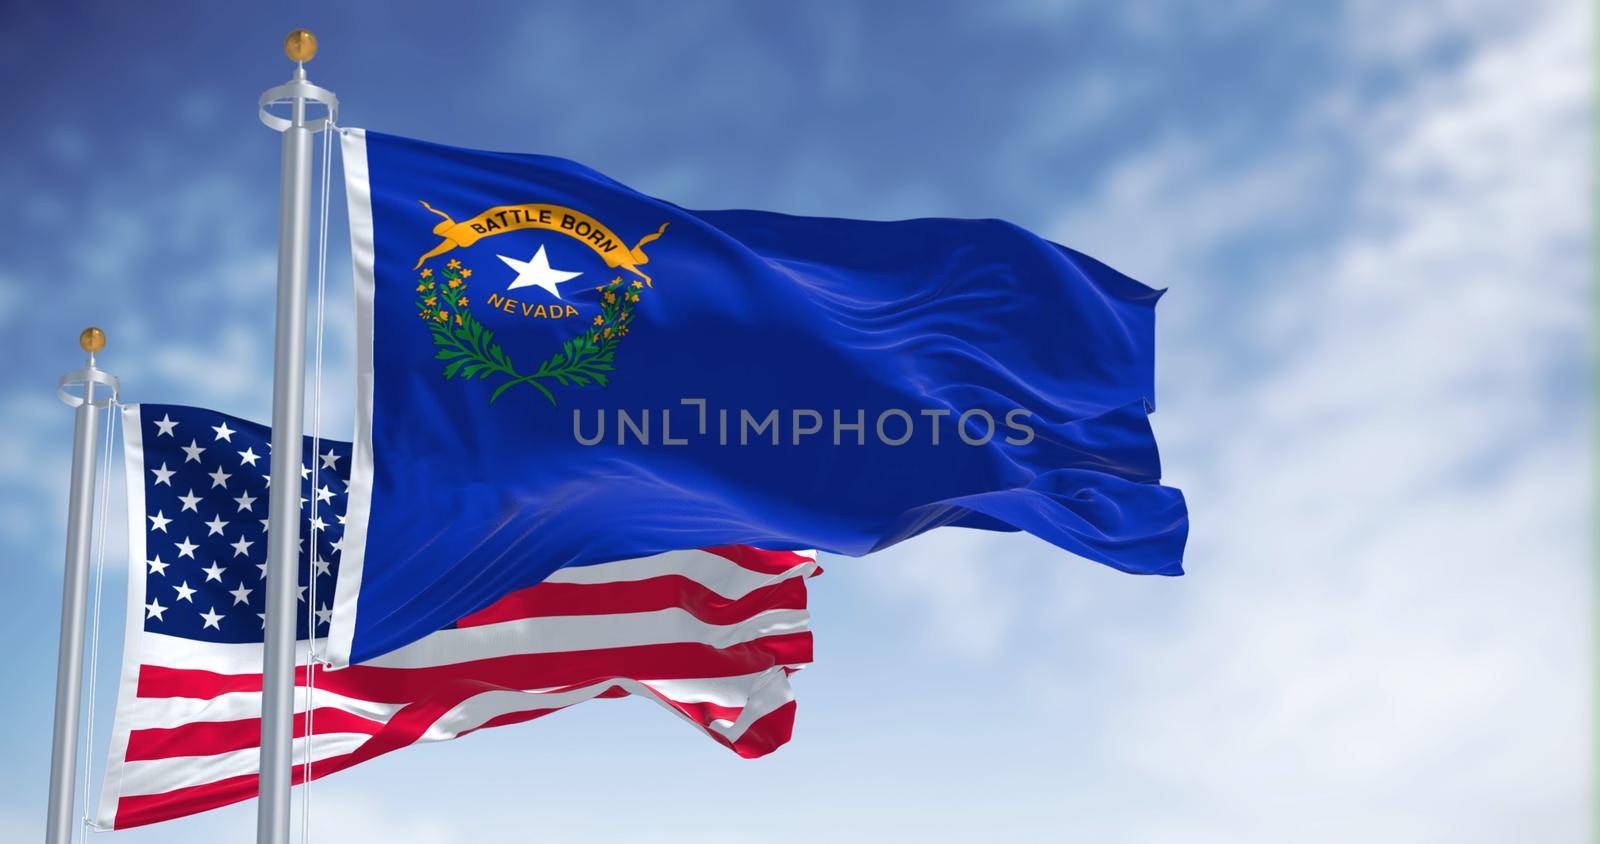 The Nevada state flag waving along with the national flag of the United States of America by rarrarorro